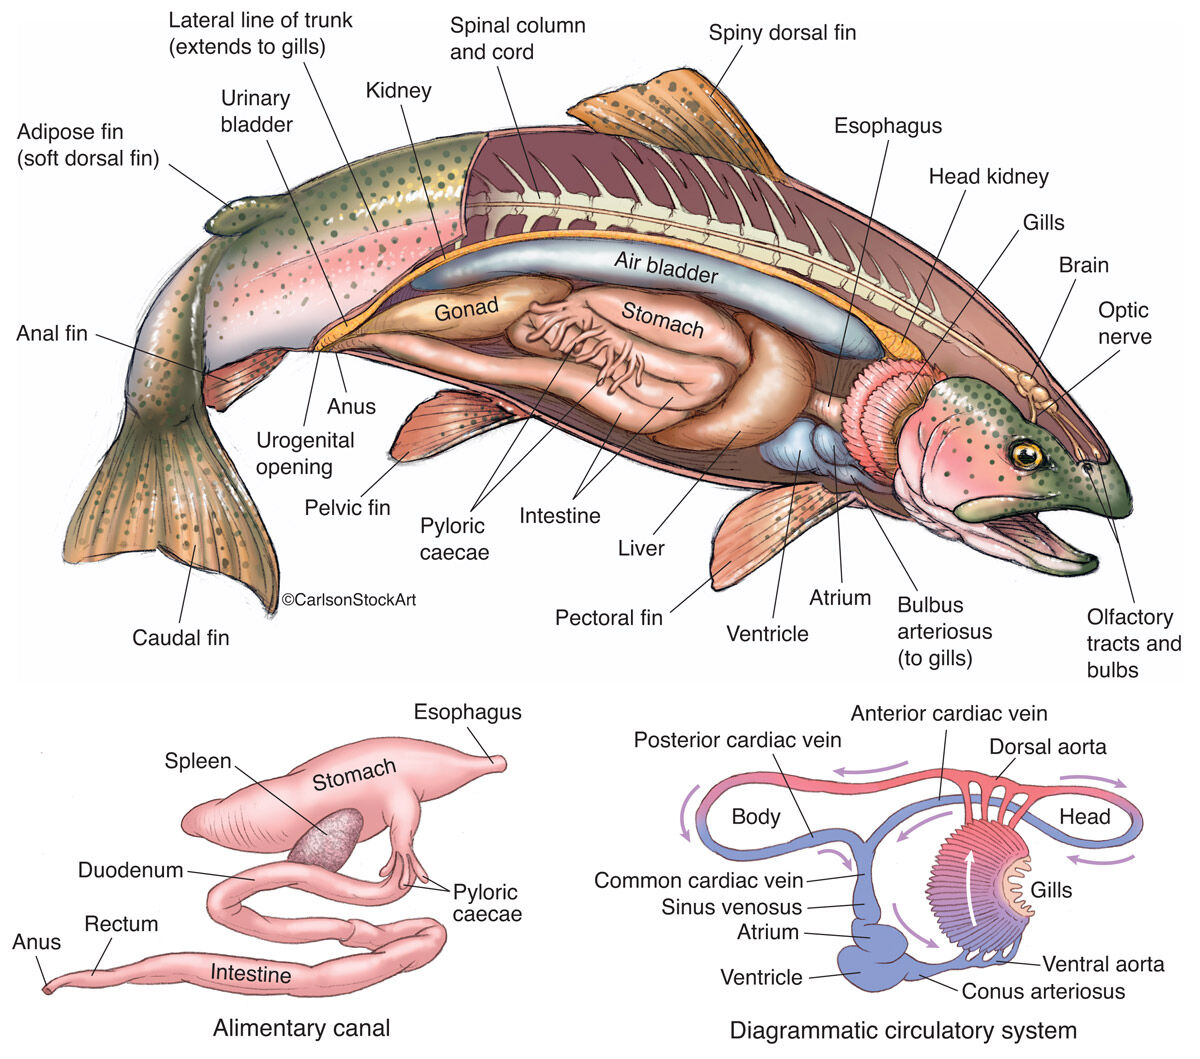 Illustration of the external and internal anatomy of a typical bony fish, the rainbow trout.